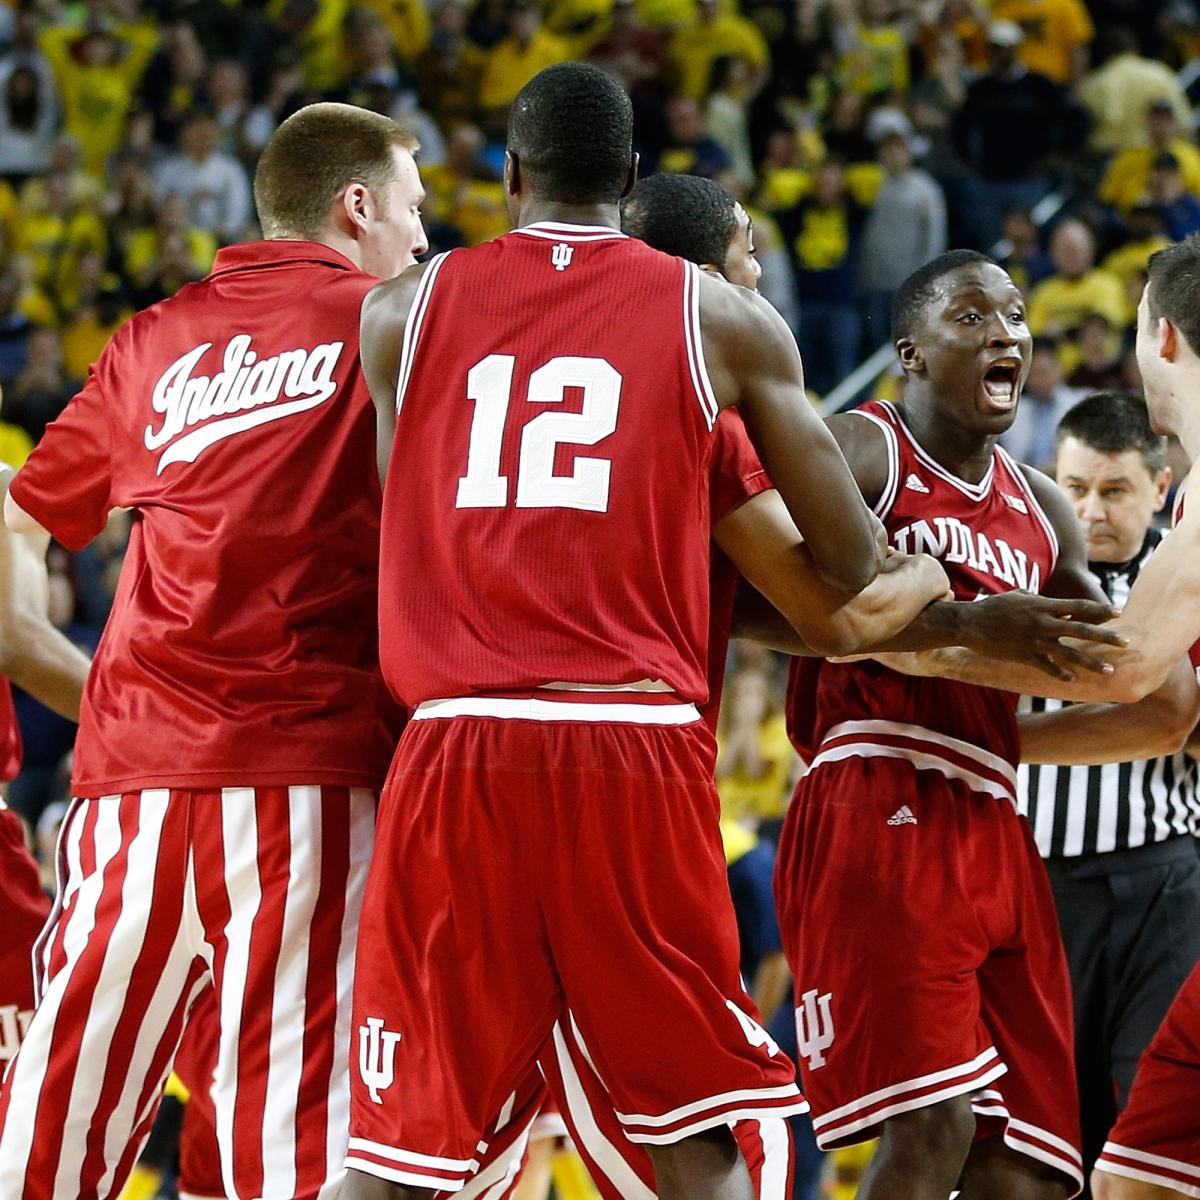 Indiana Basketball: 4 Hoosiers Who Could Have a Breakout Season in 2013-14 | Bleacher ...